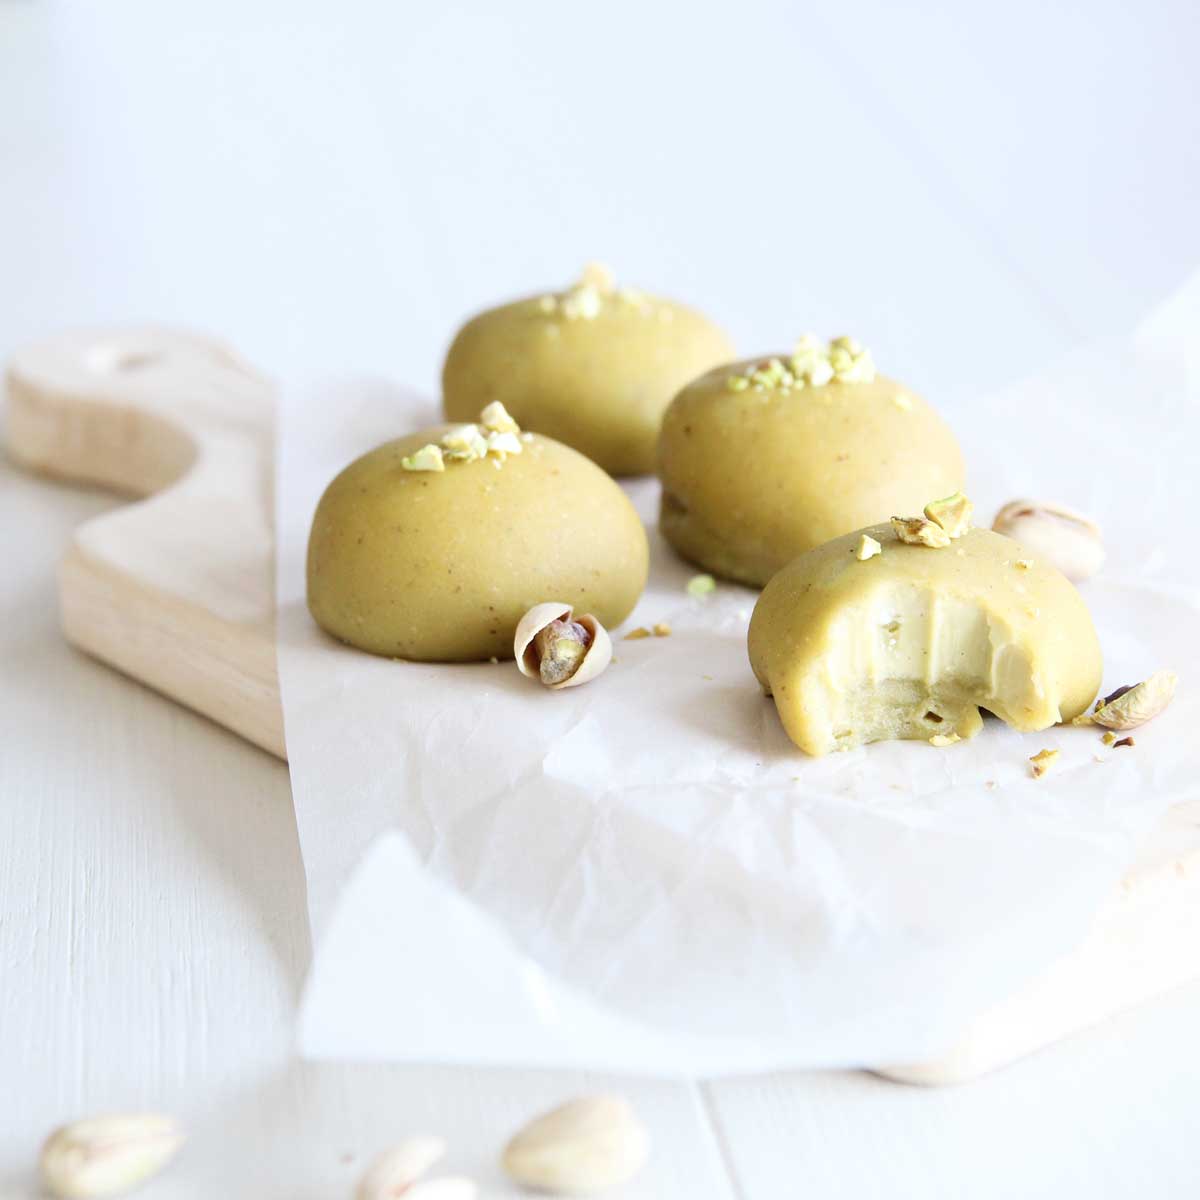 The Best Ever Pistachio Butter Mochi (Made with Mochiko Flour) - Sweet Matcha Whipped Cream